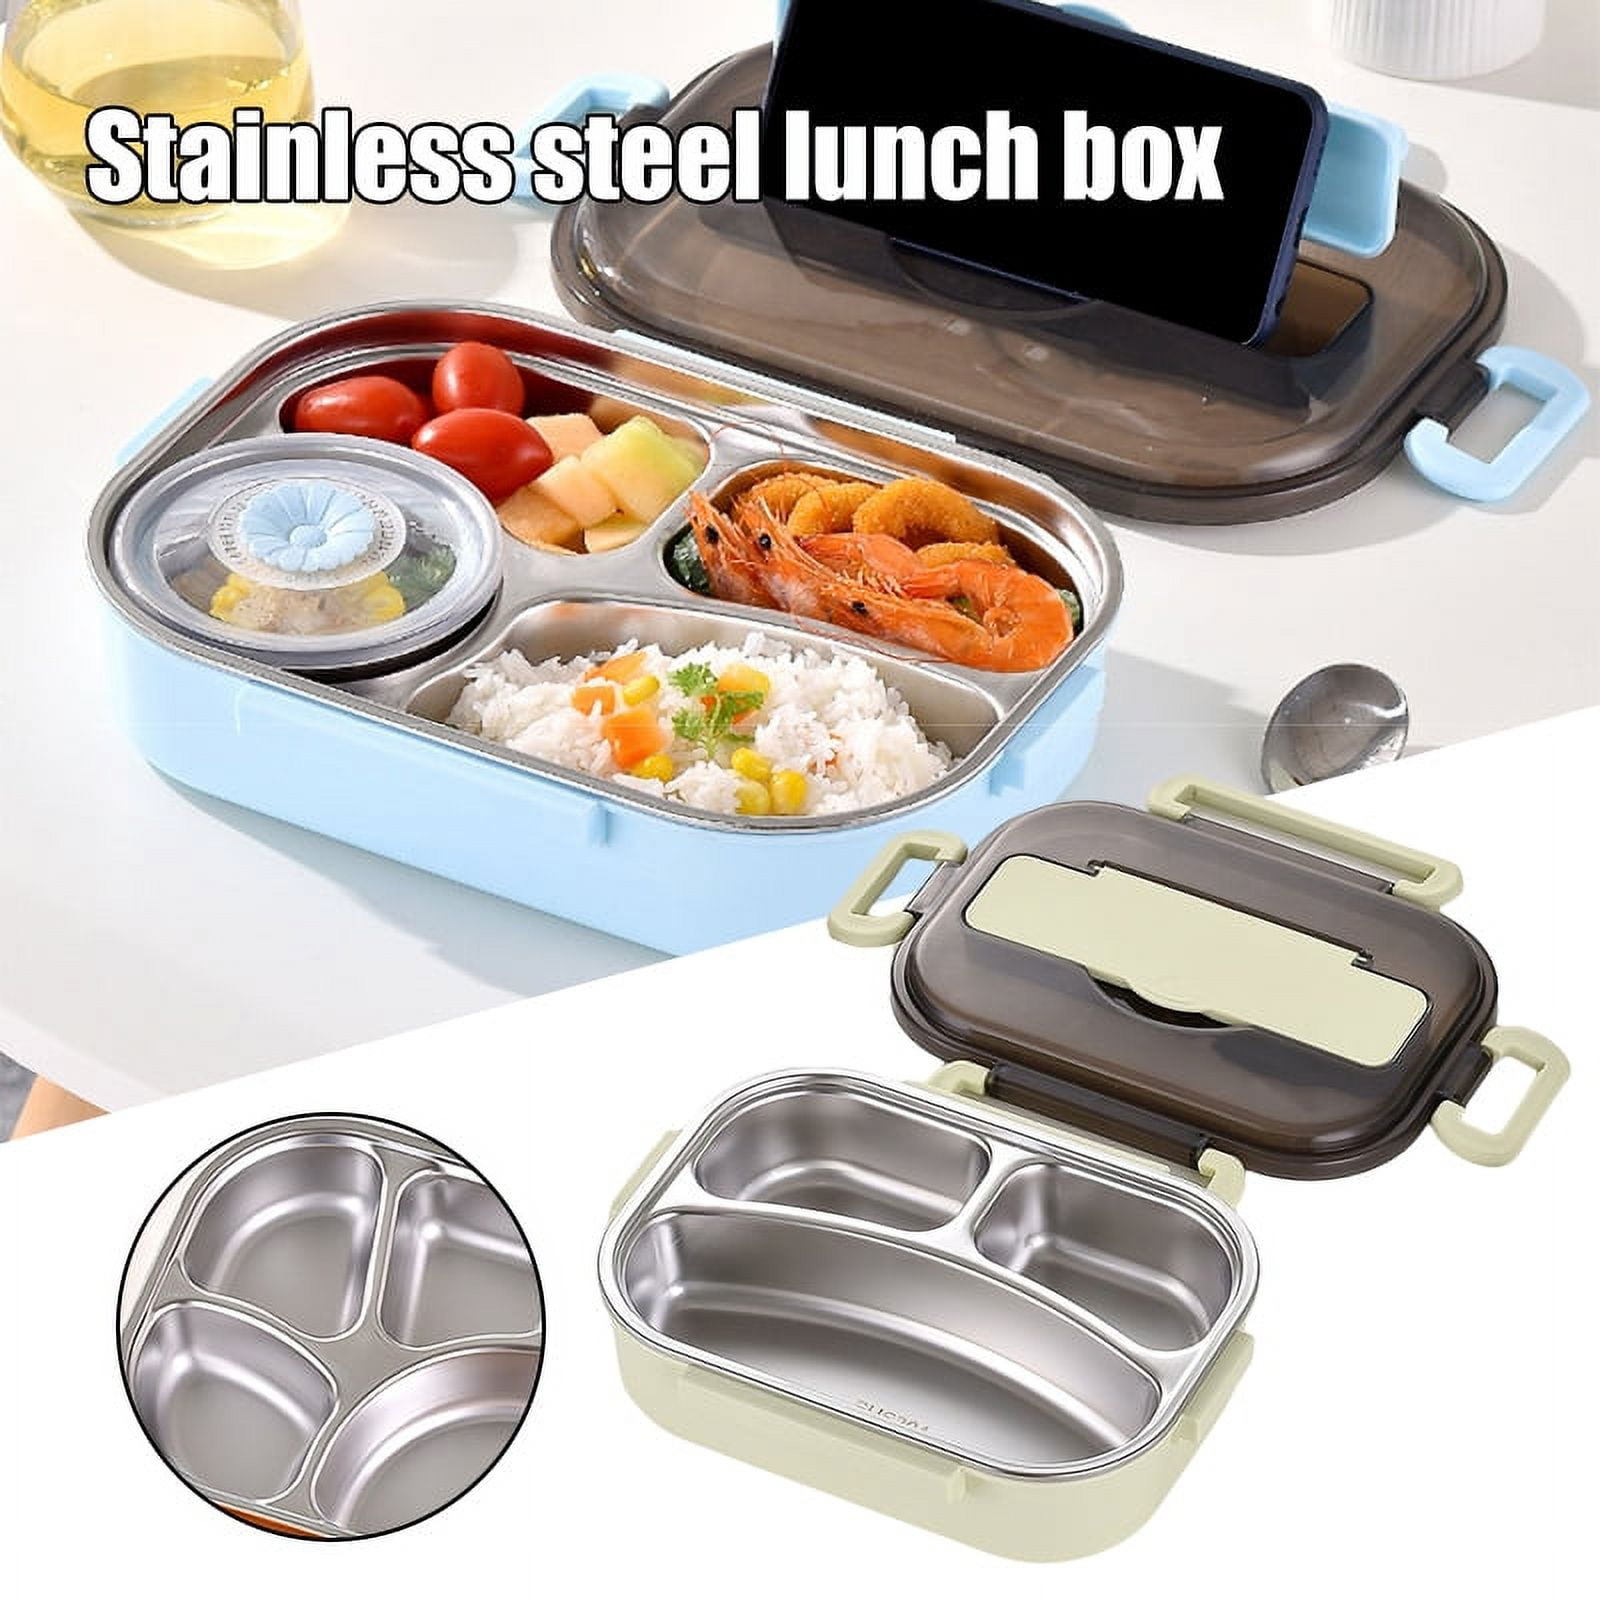  Ibili Stainless Steel Camping Lunch Box Set With 2